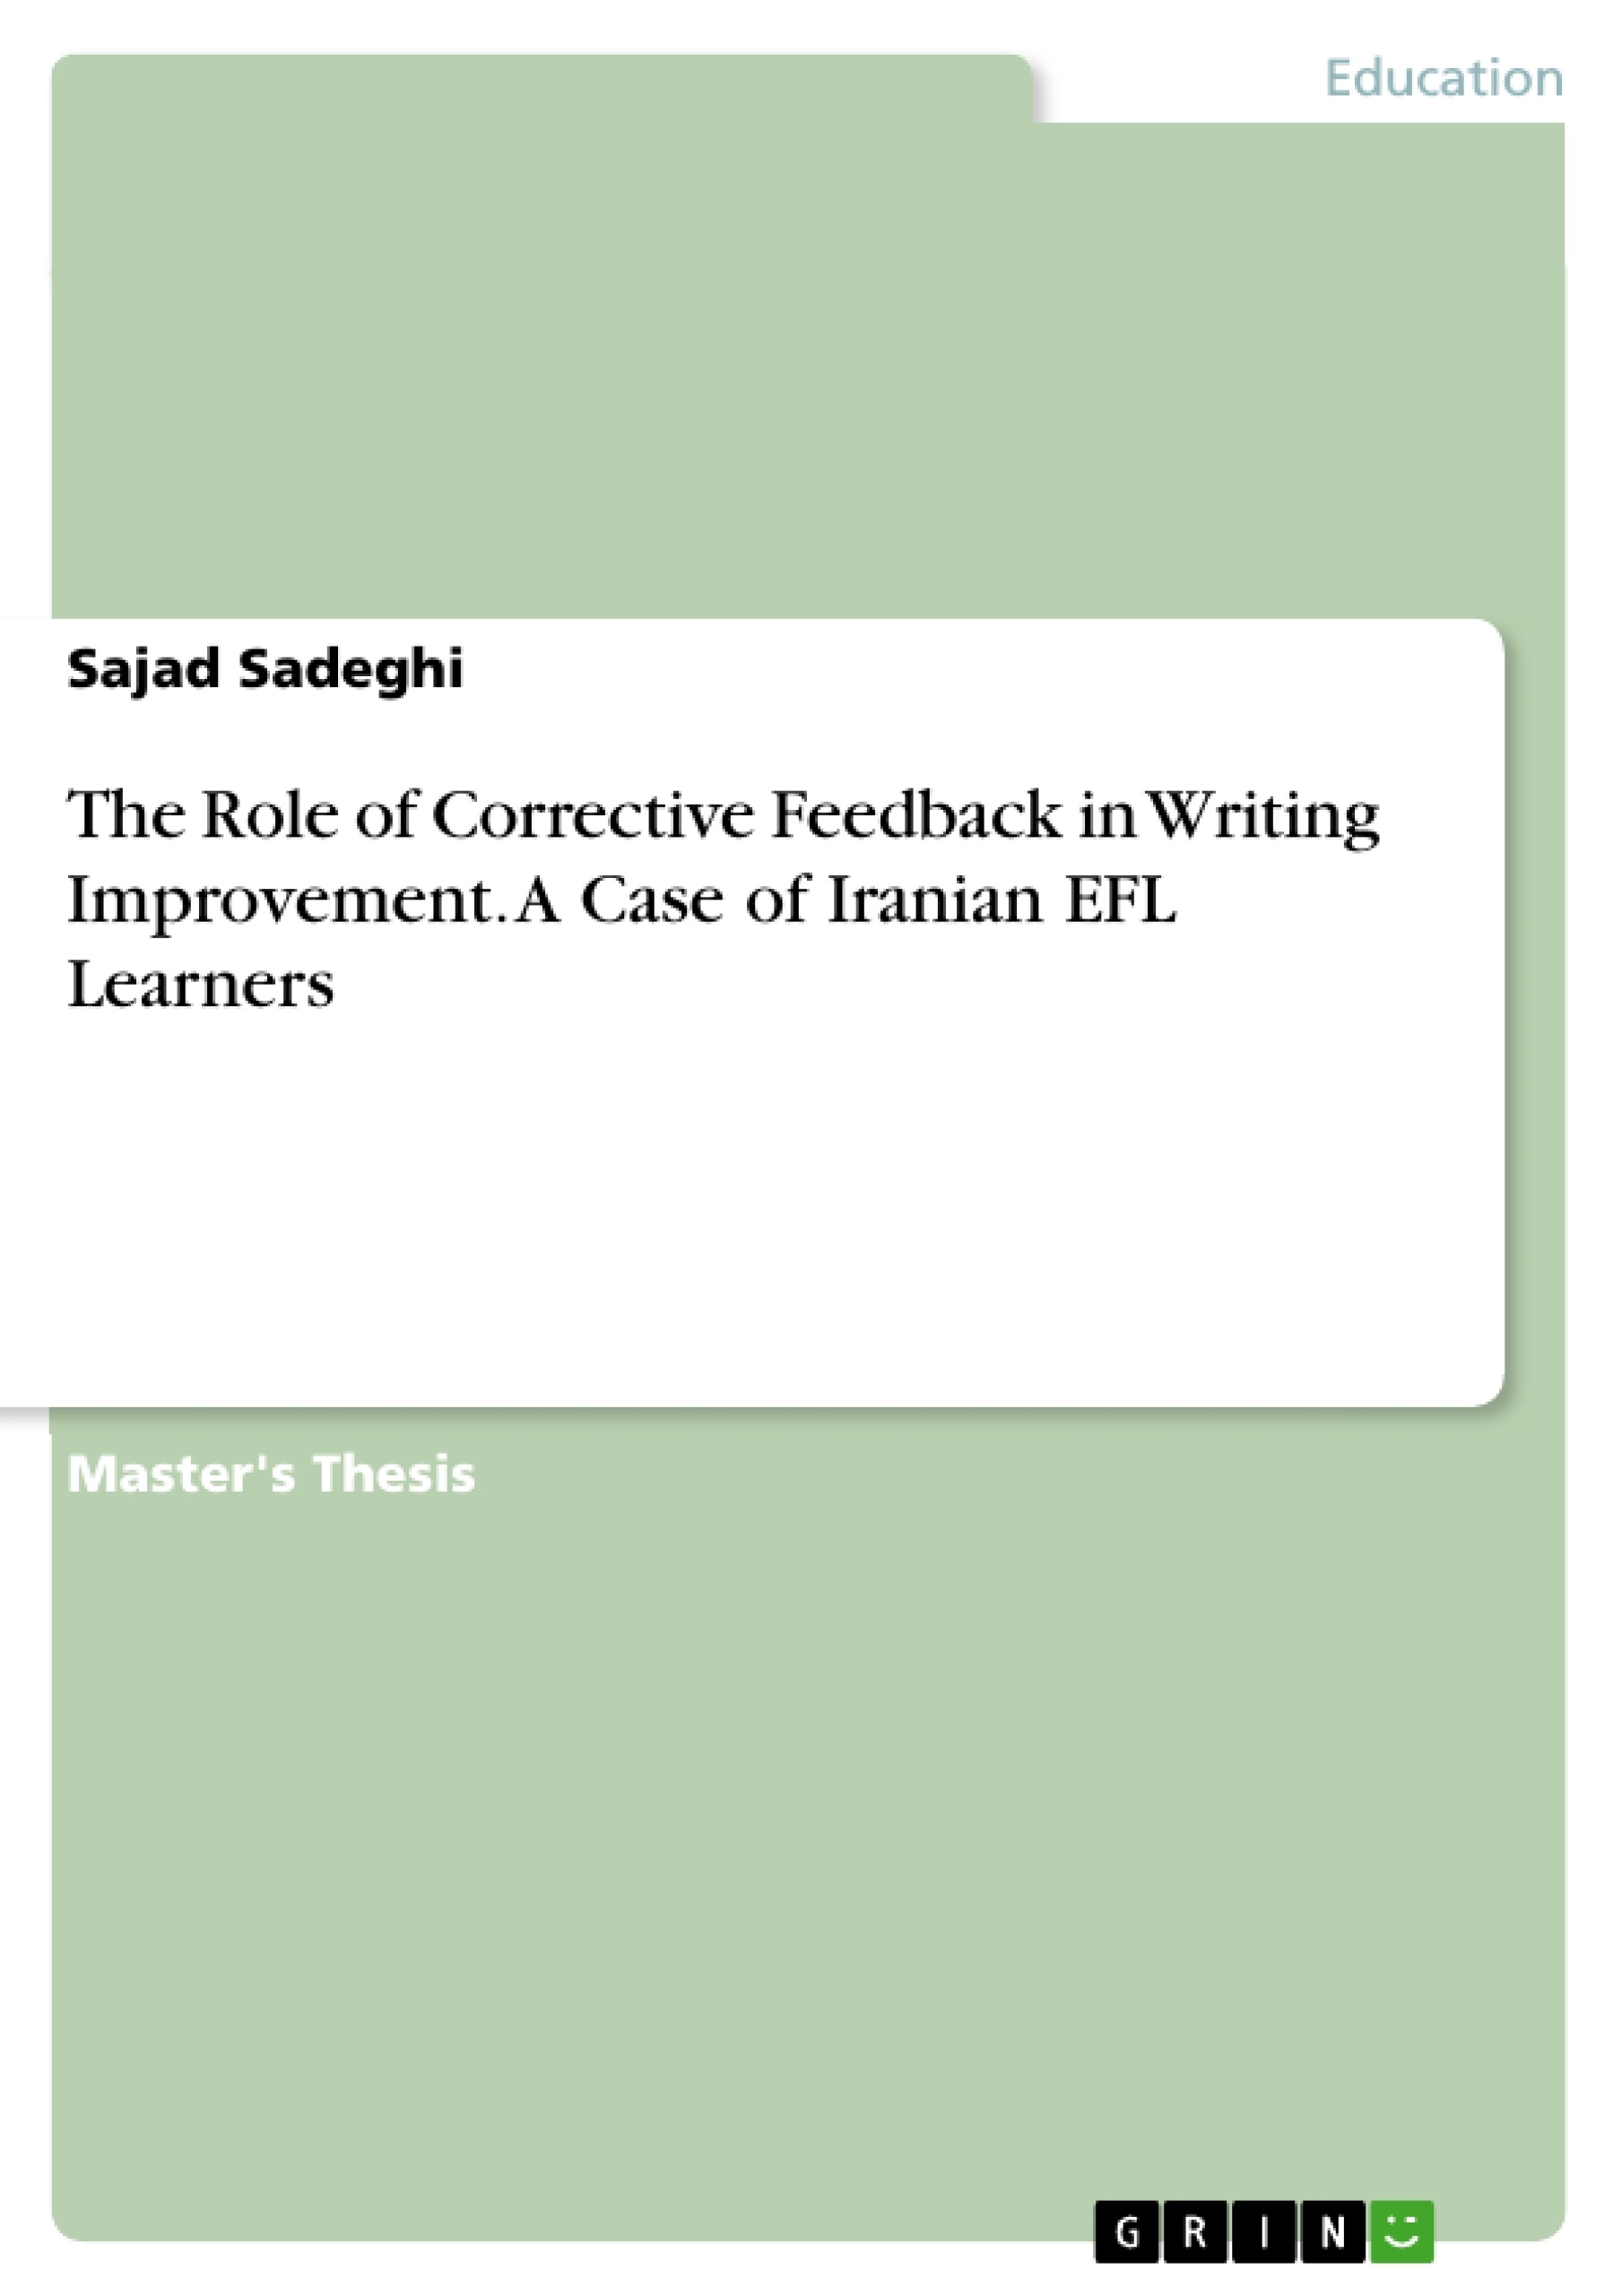 Title: The Role of Corrective Feedback in Writing Improvement. A Case of Iranian EFL Learners